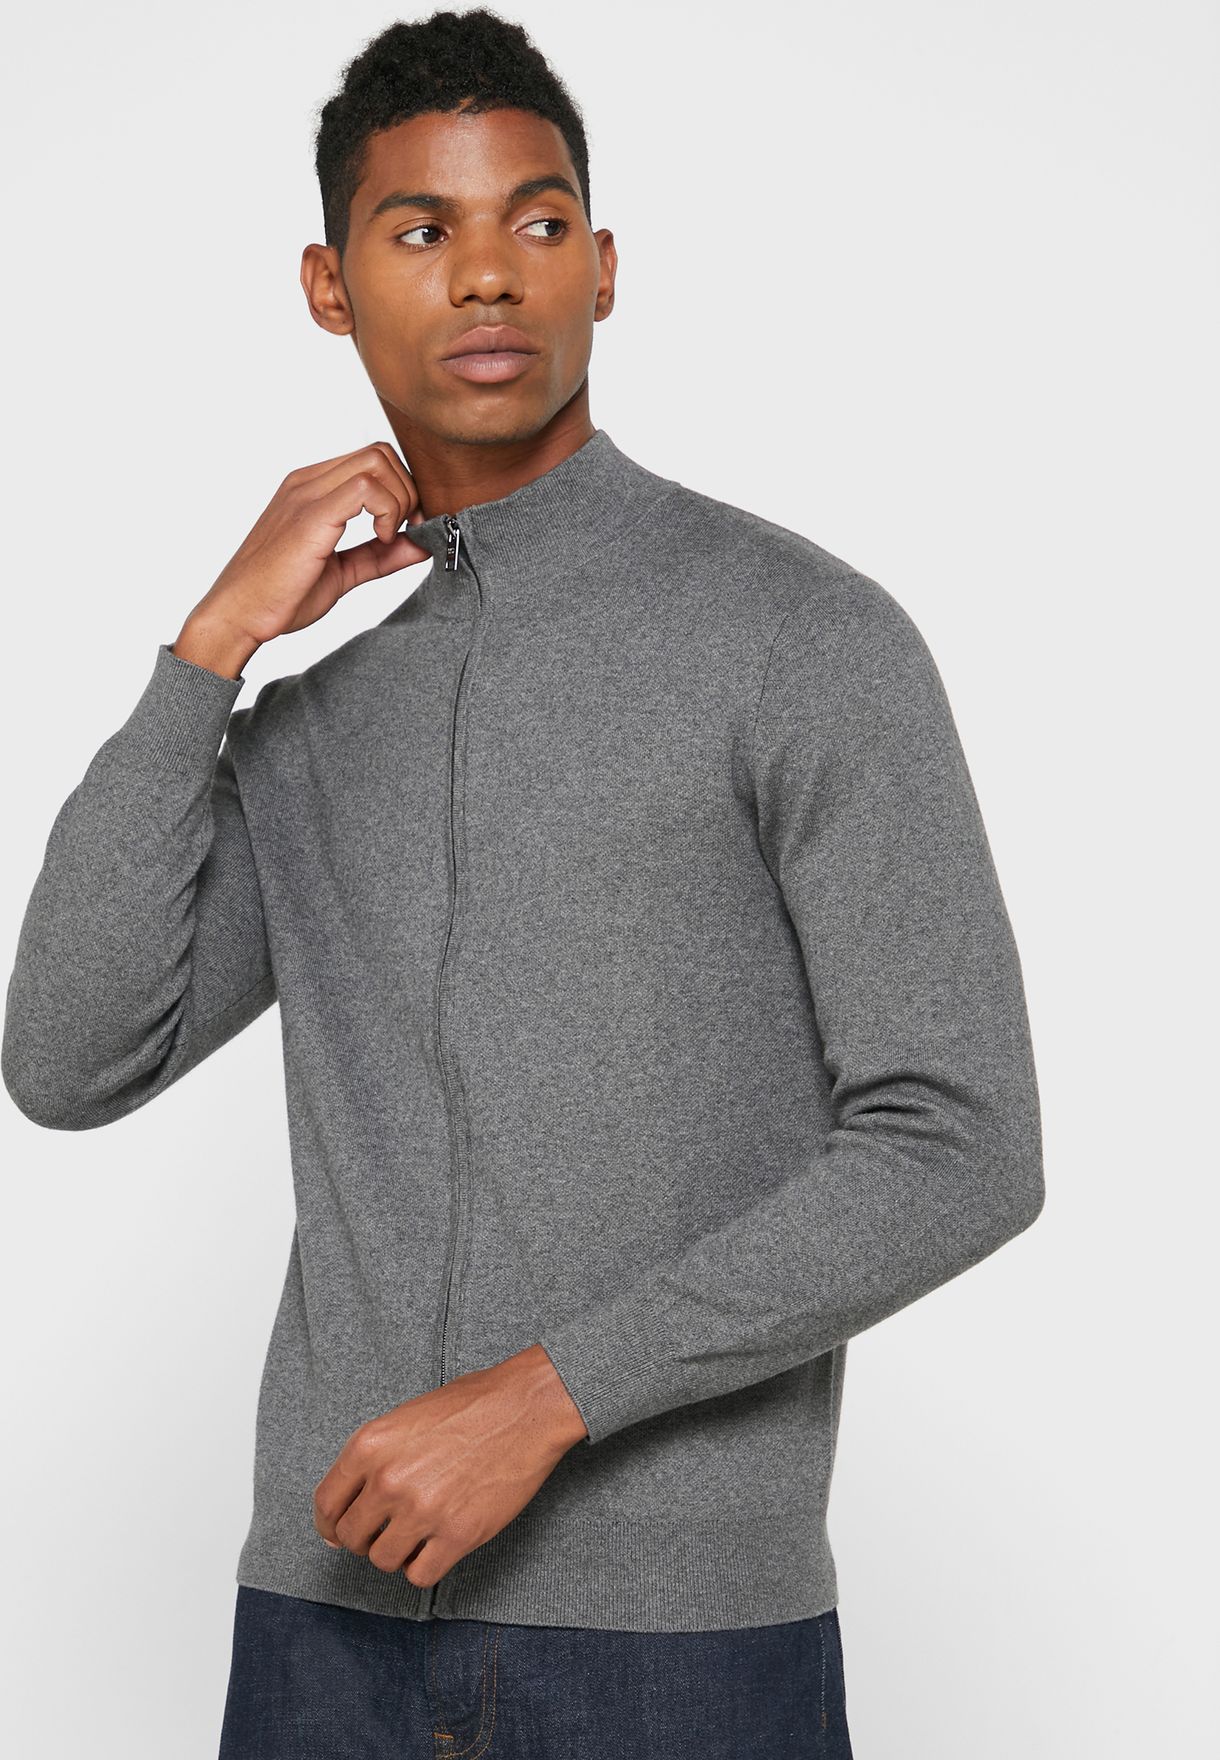 Structured sweater with zipper neck S Men Mango Men Clothing Sweaters Cardigans 